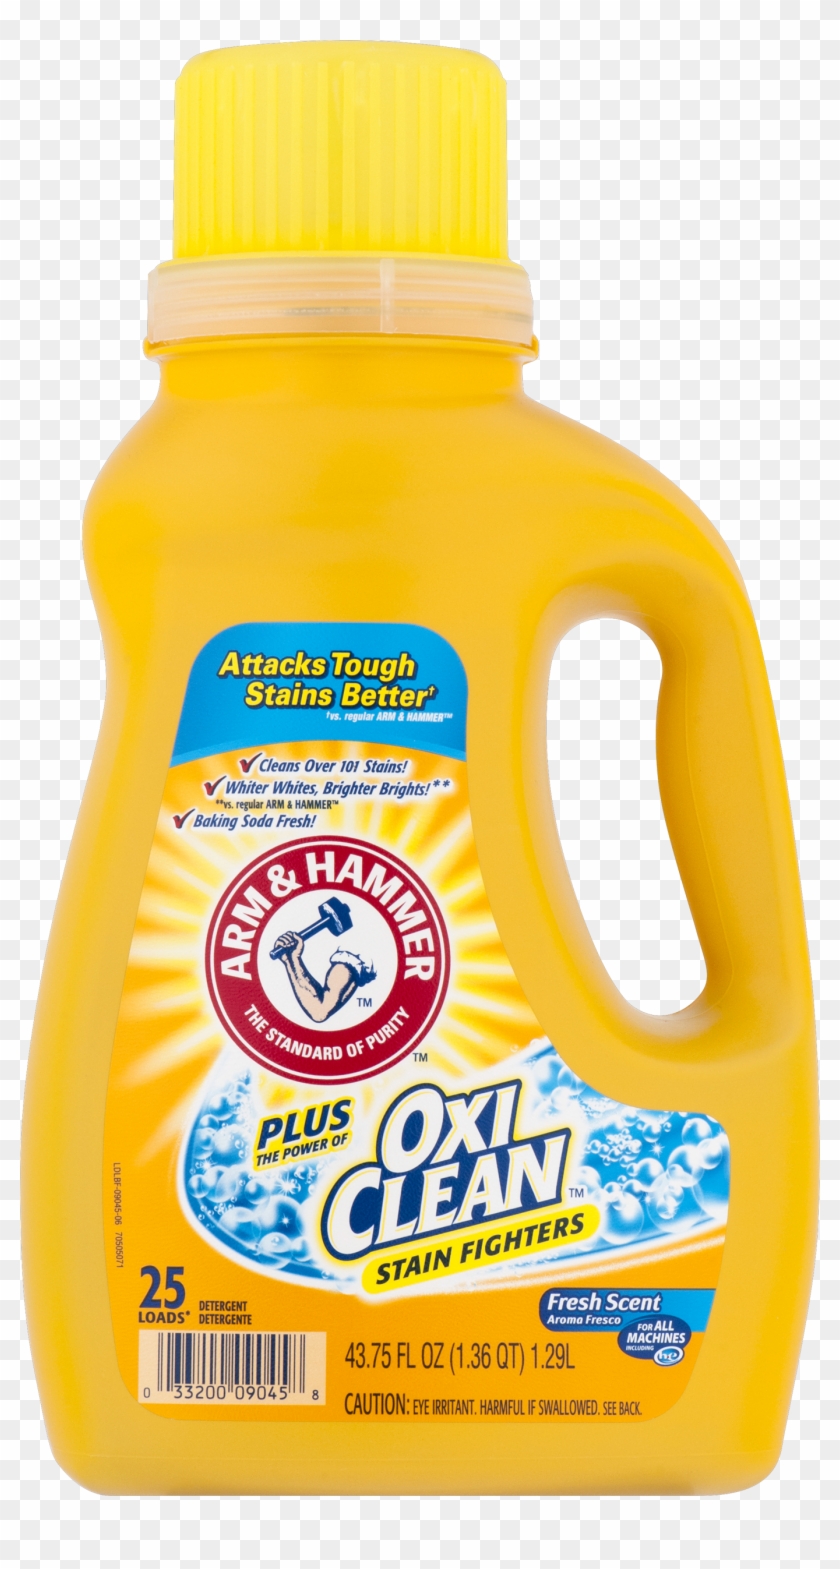 Arm & Hammer Plus Oxiclean Stain Fighters Fresh Scent - Arm & Hammer Detergent #1752811